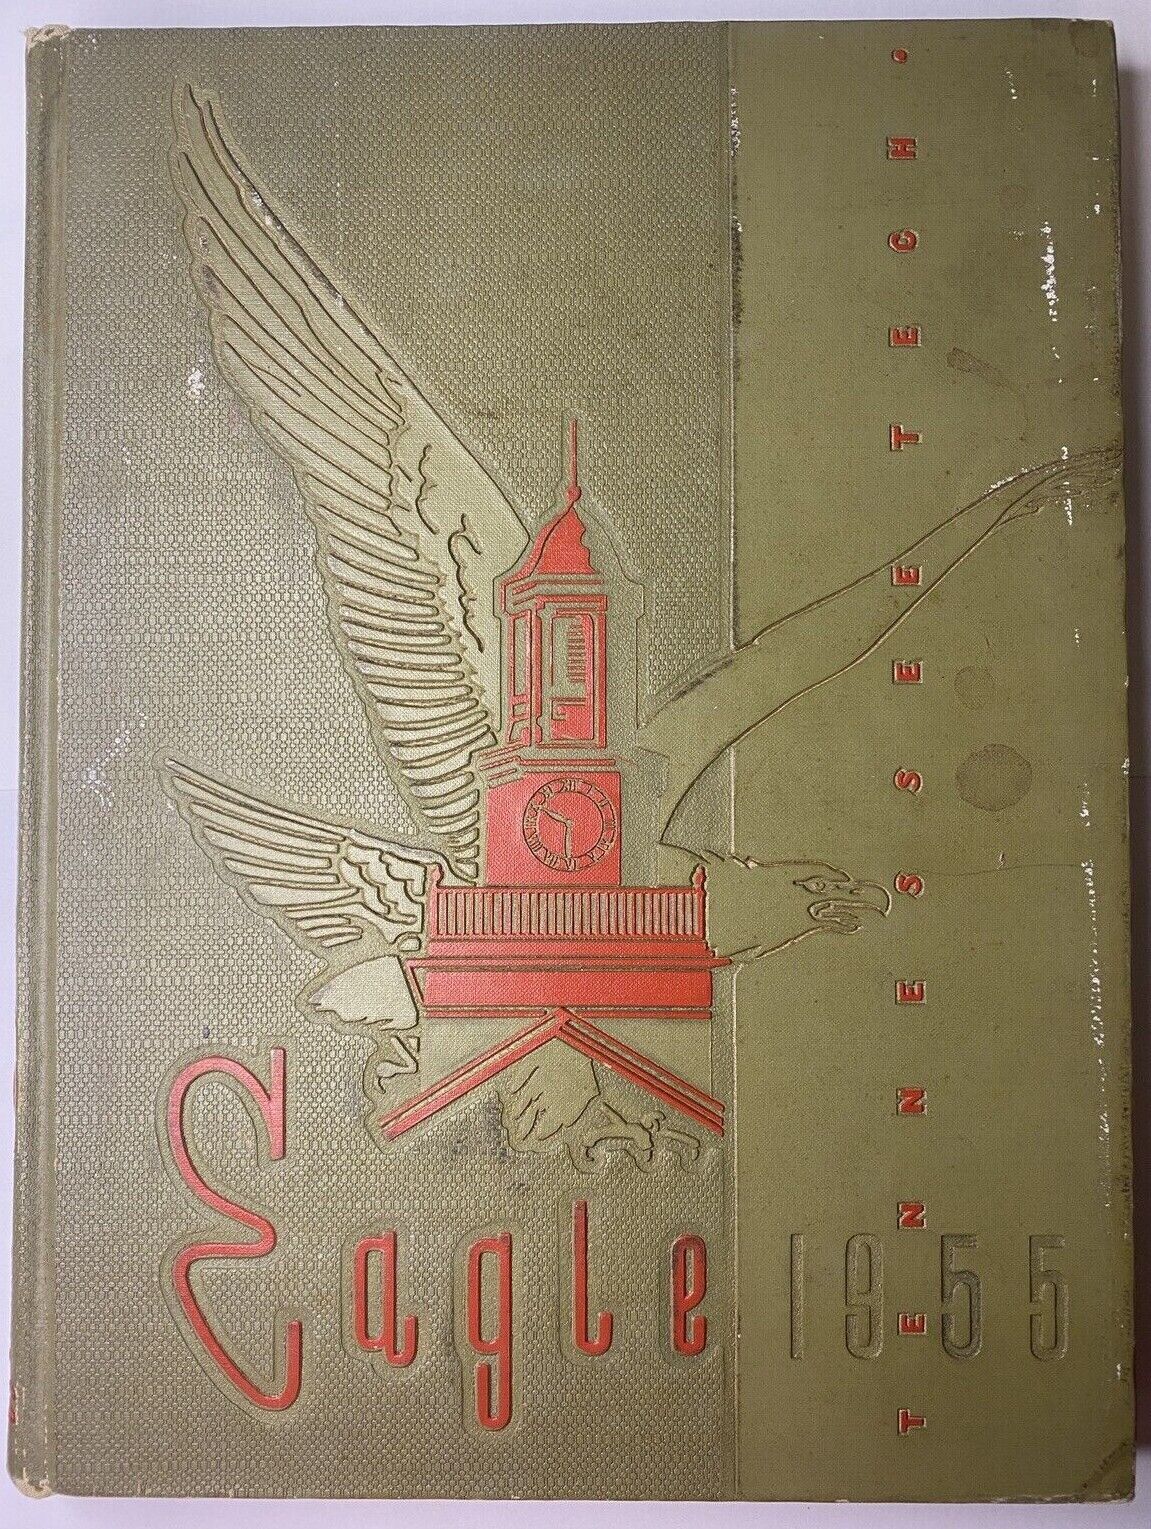 Tennessee Tech University Yearbook Polytechnic Cookeville TN Eagle Vintage 1955